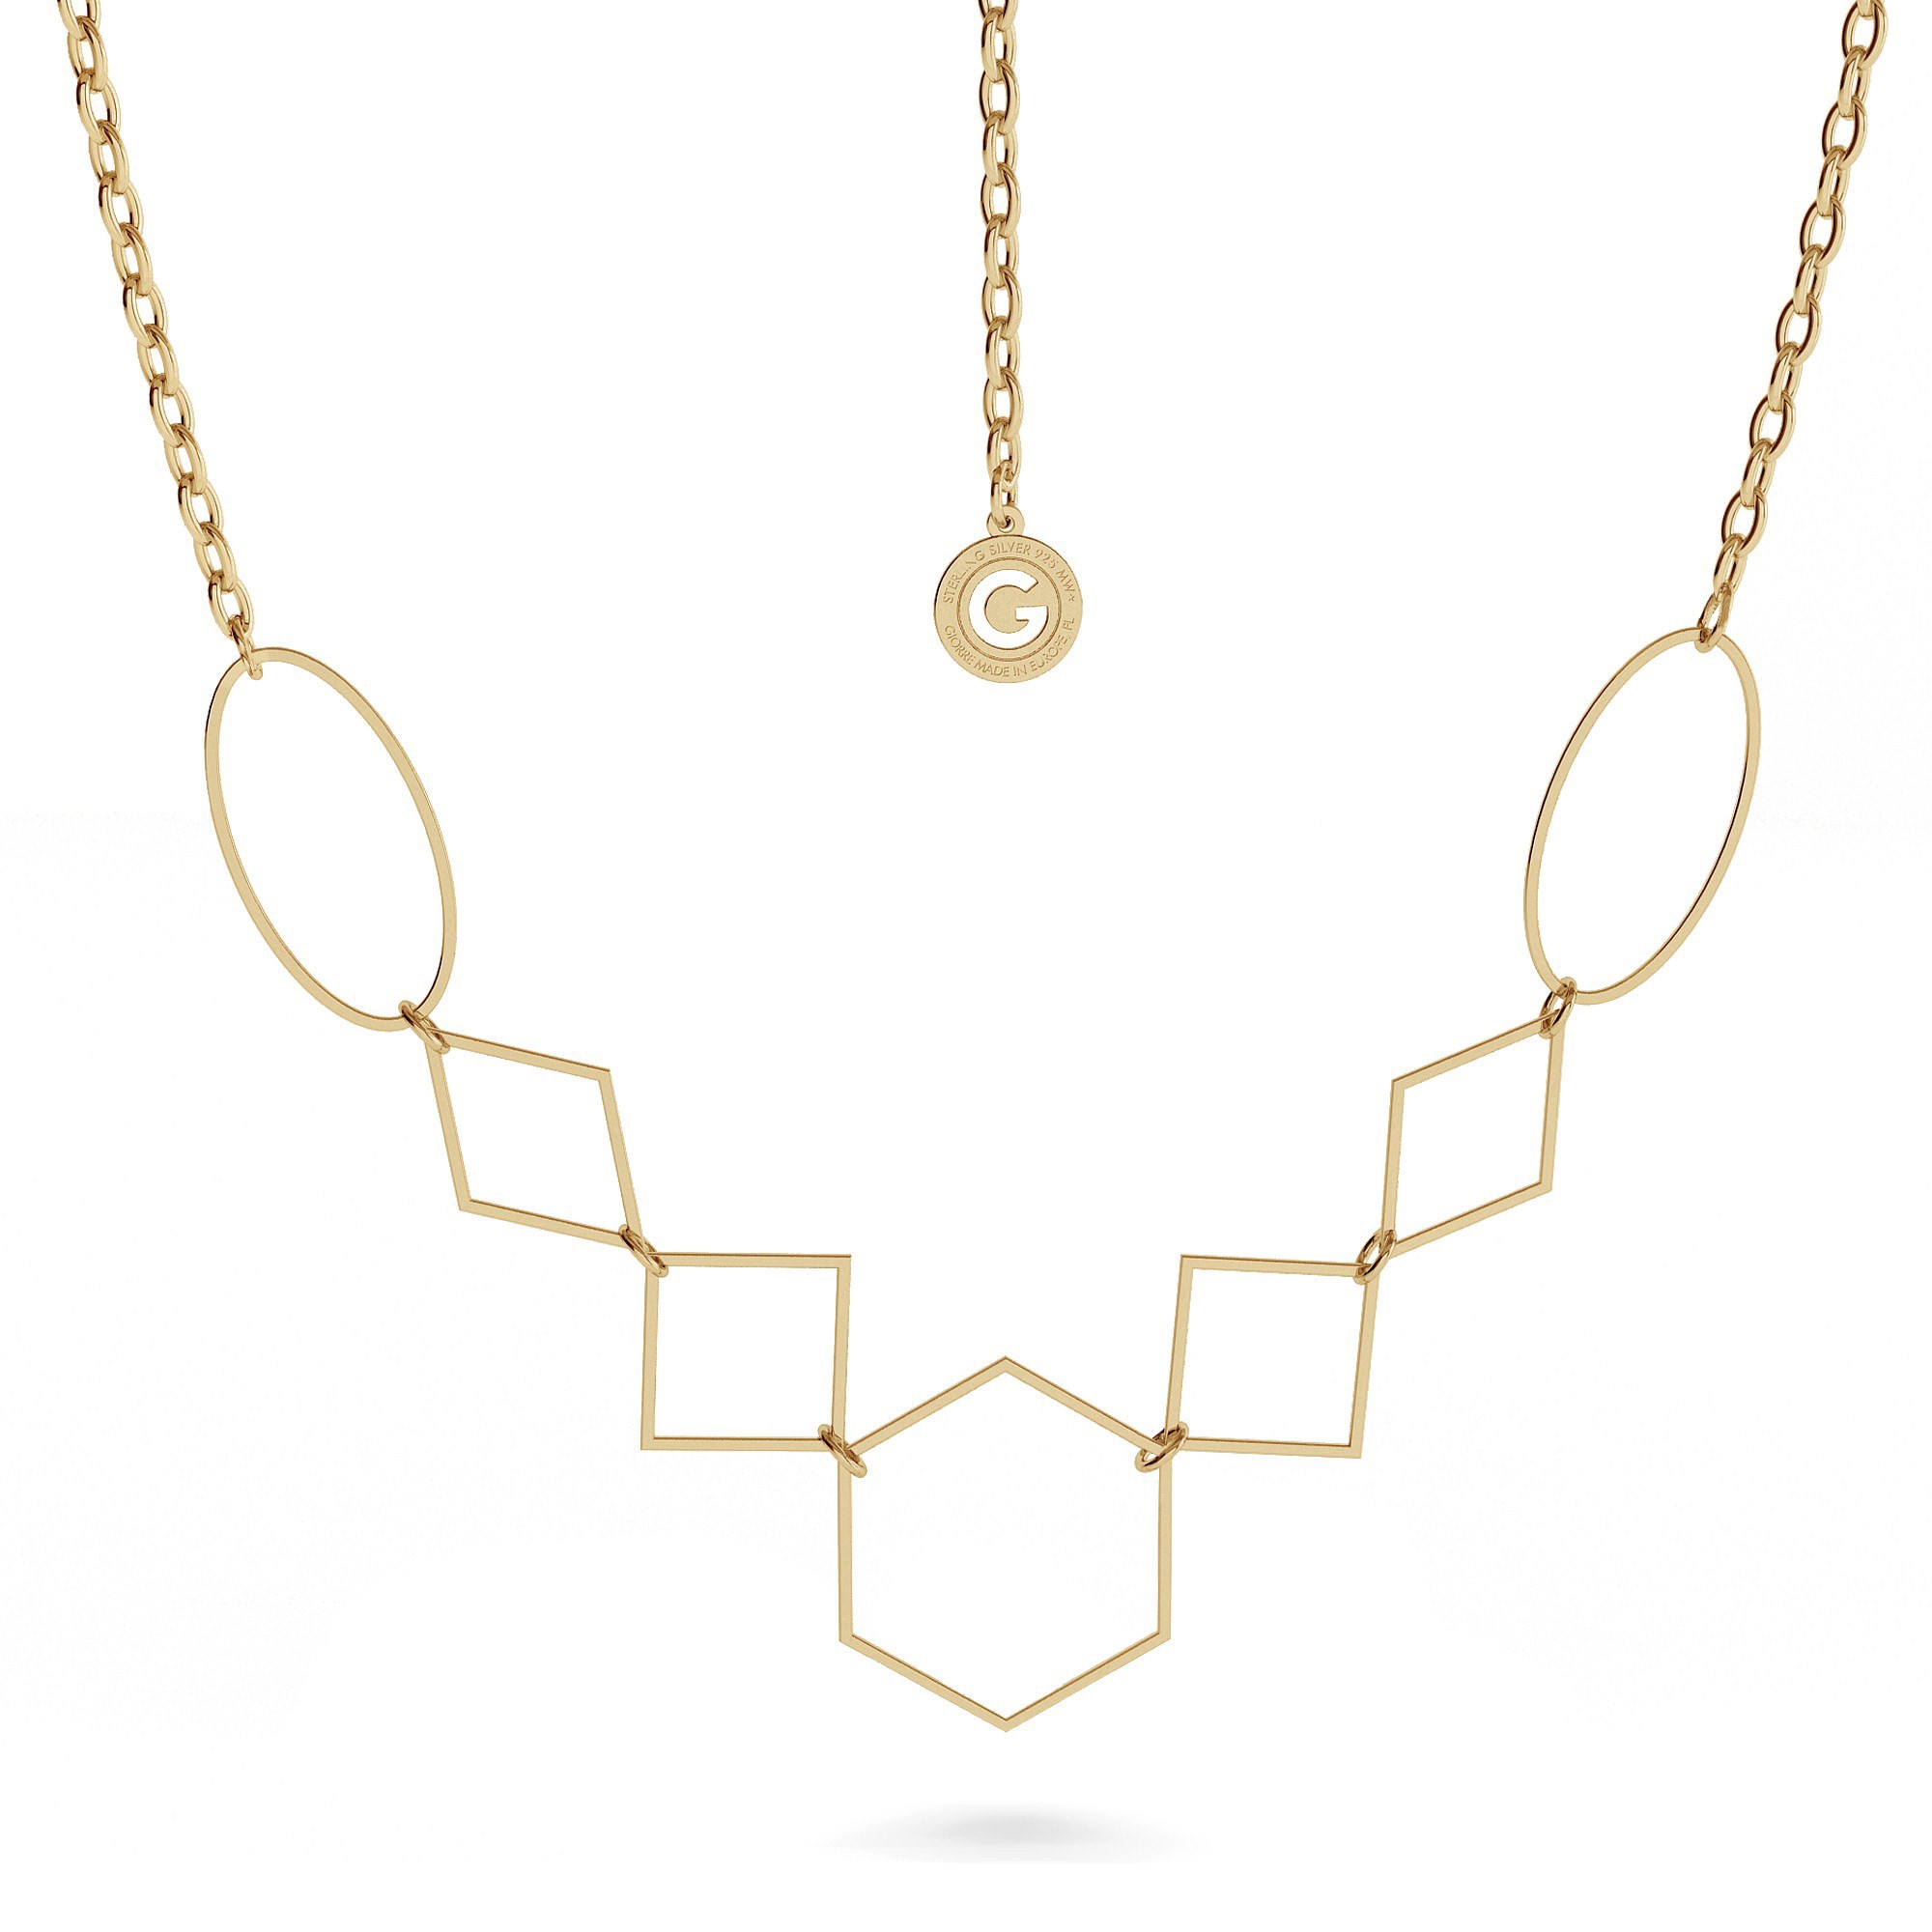 Giorre Woman's Necklace 34442